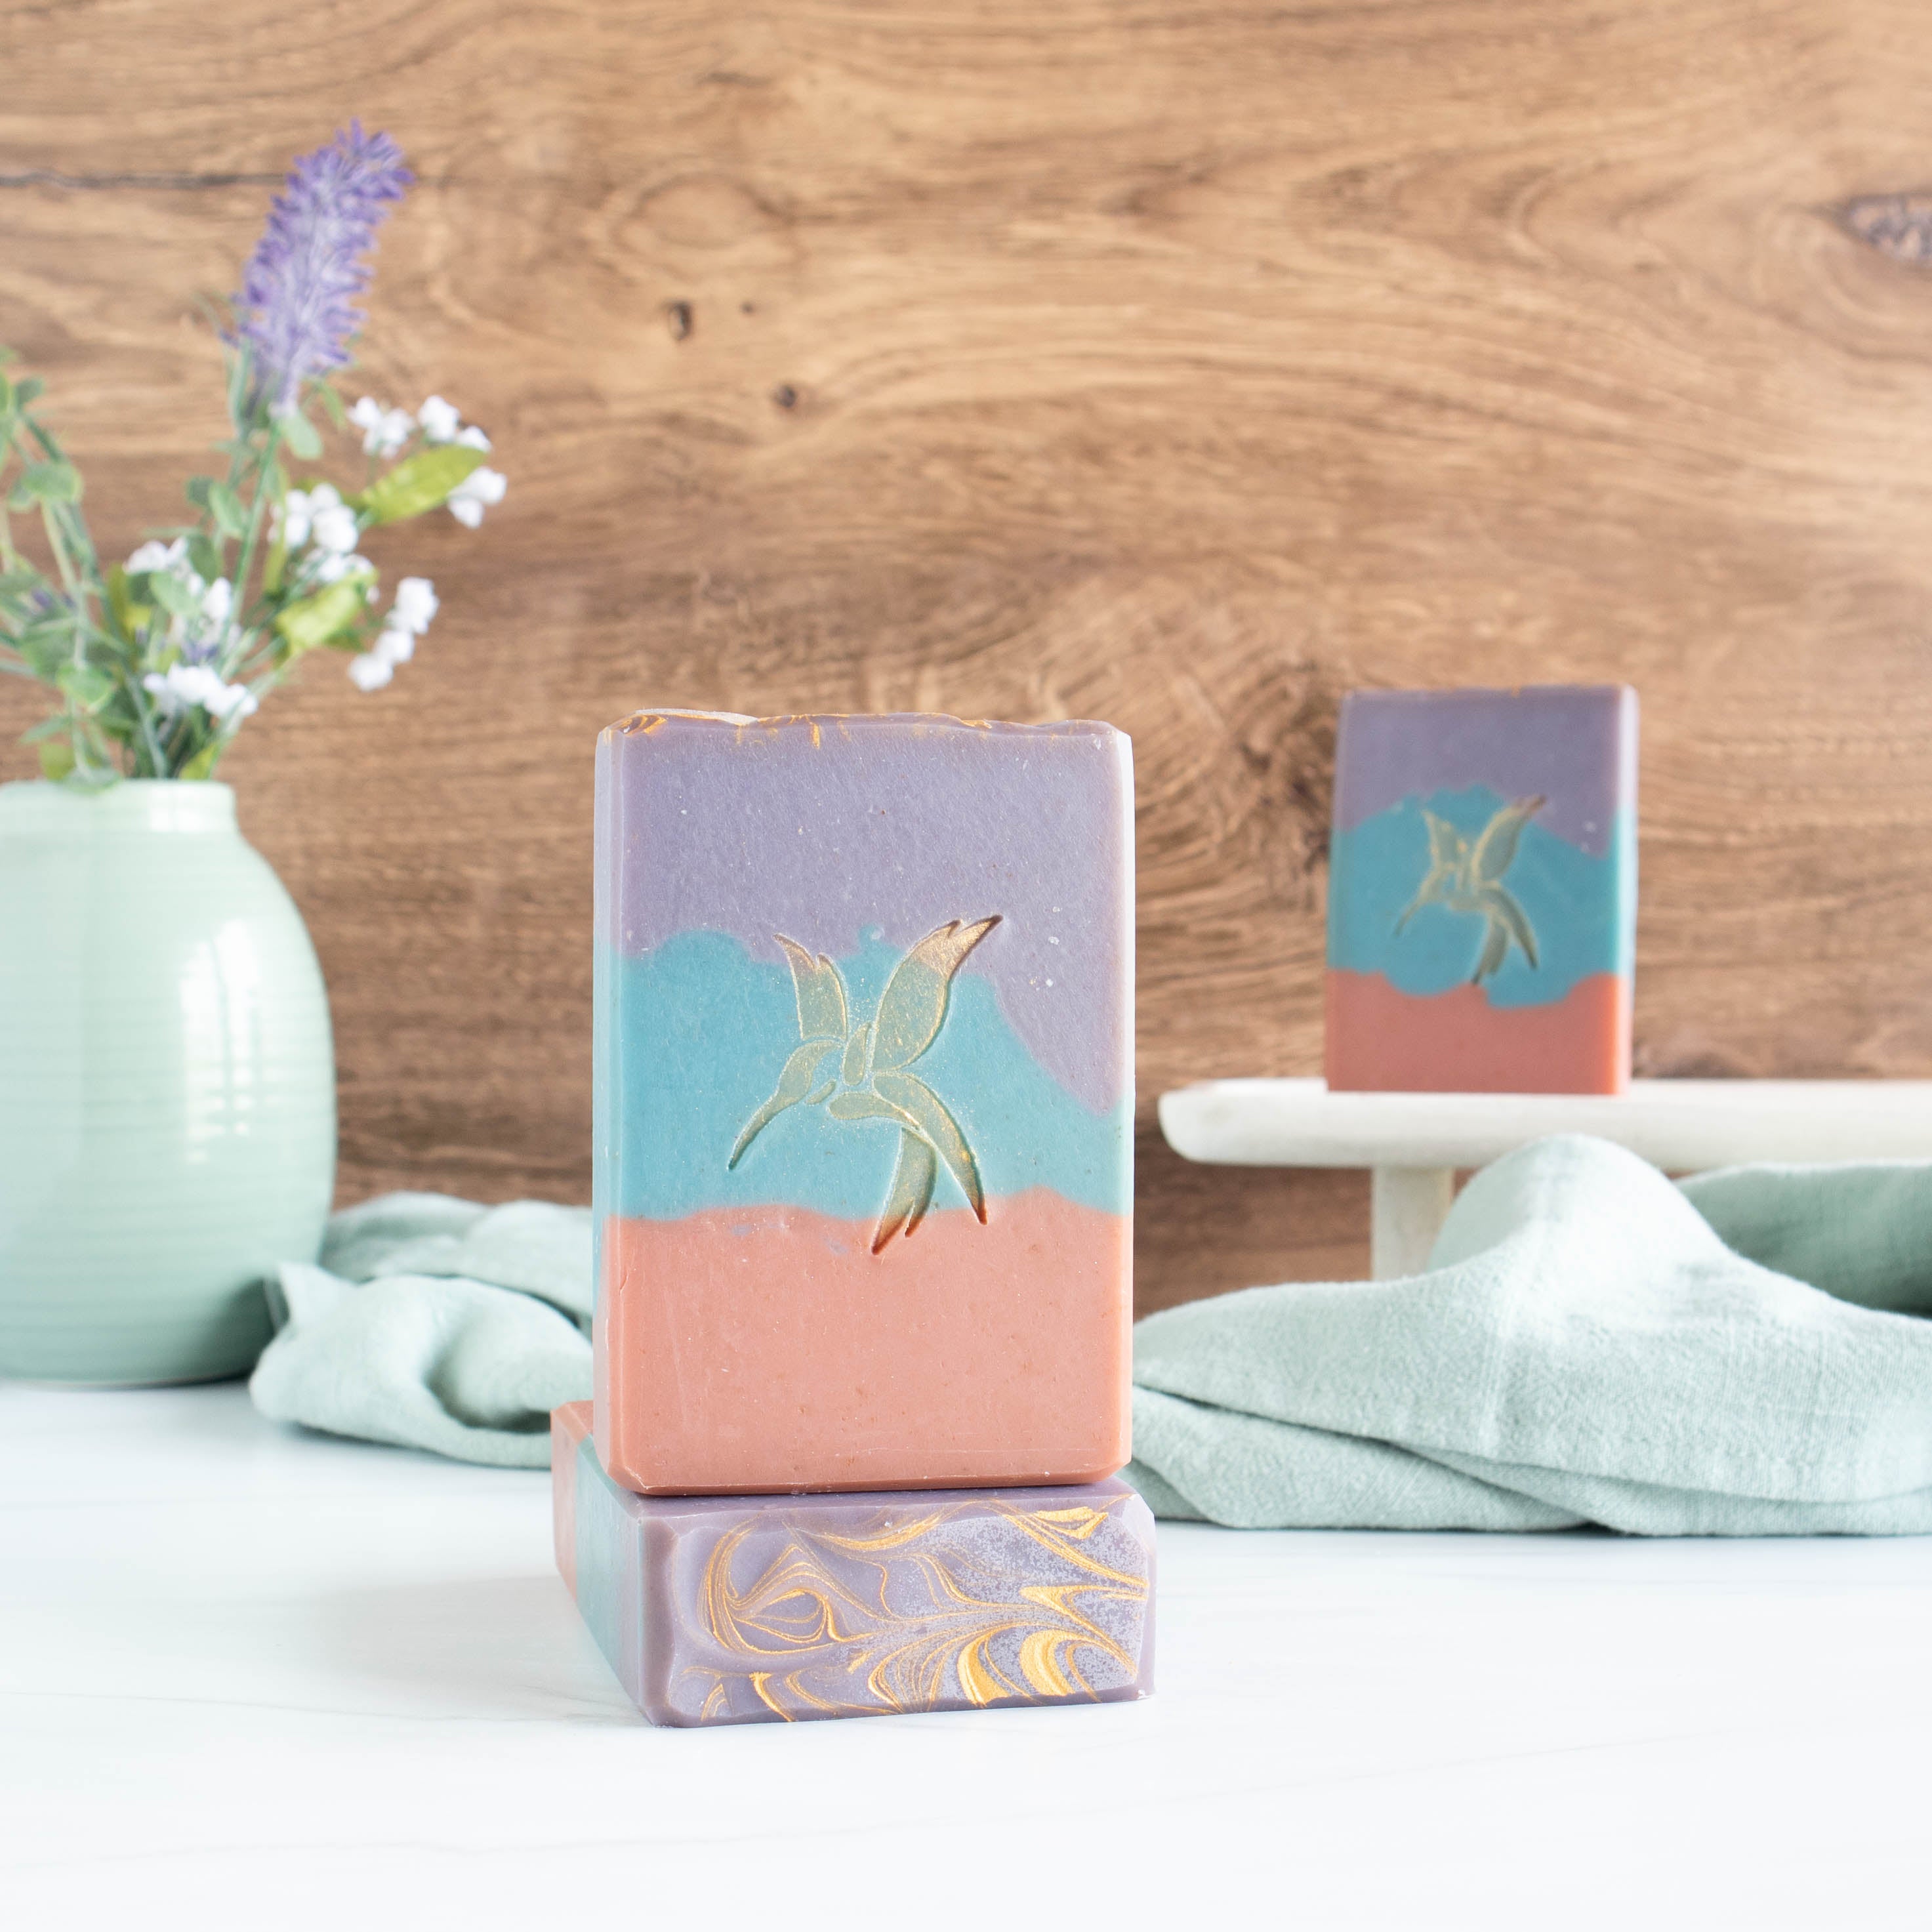 3 sea salt and orchid soaps, 2 towards the front and one in the background. The soaps are rust red on bottom, a blue middle and a purple to. There is also a hummingbird stamp in the middle that is gold. There is a wooden background, a pretty sage green vase in the back left and then a sage green towel running in the background.